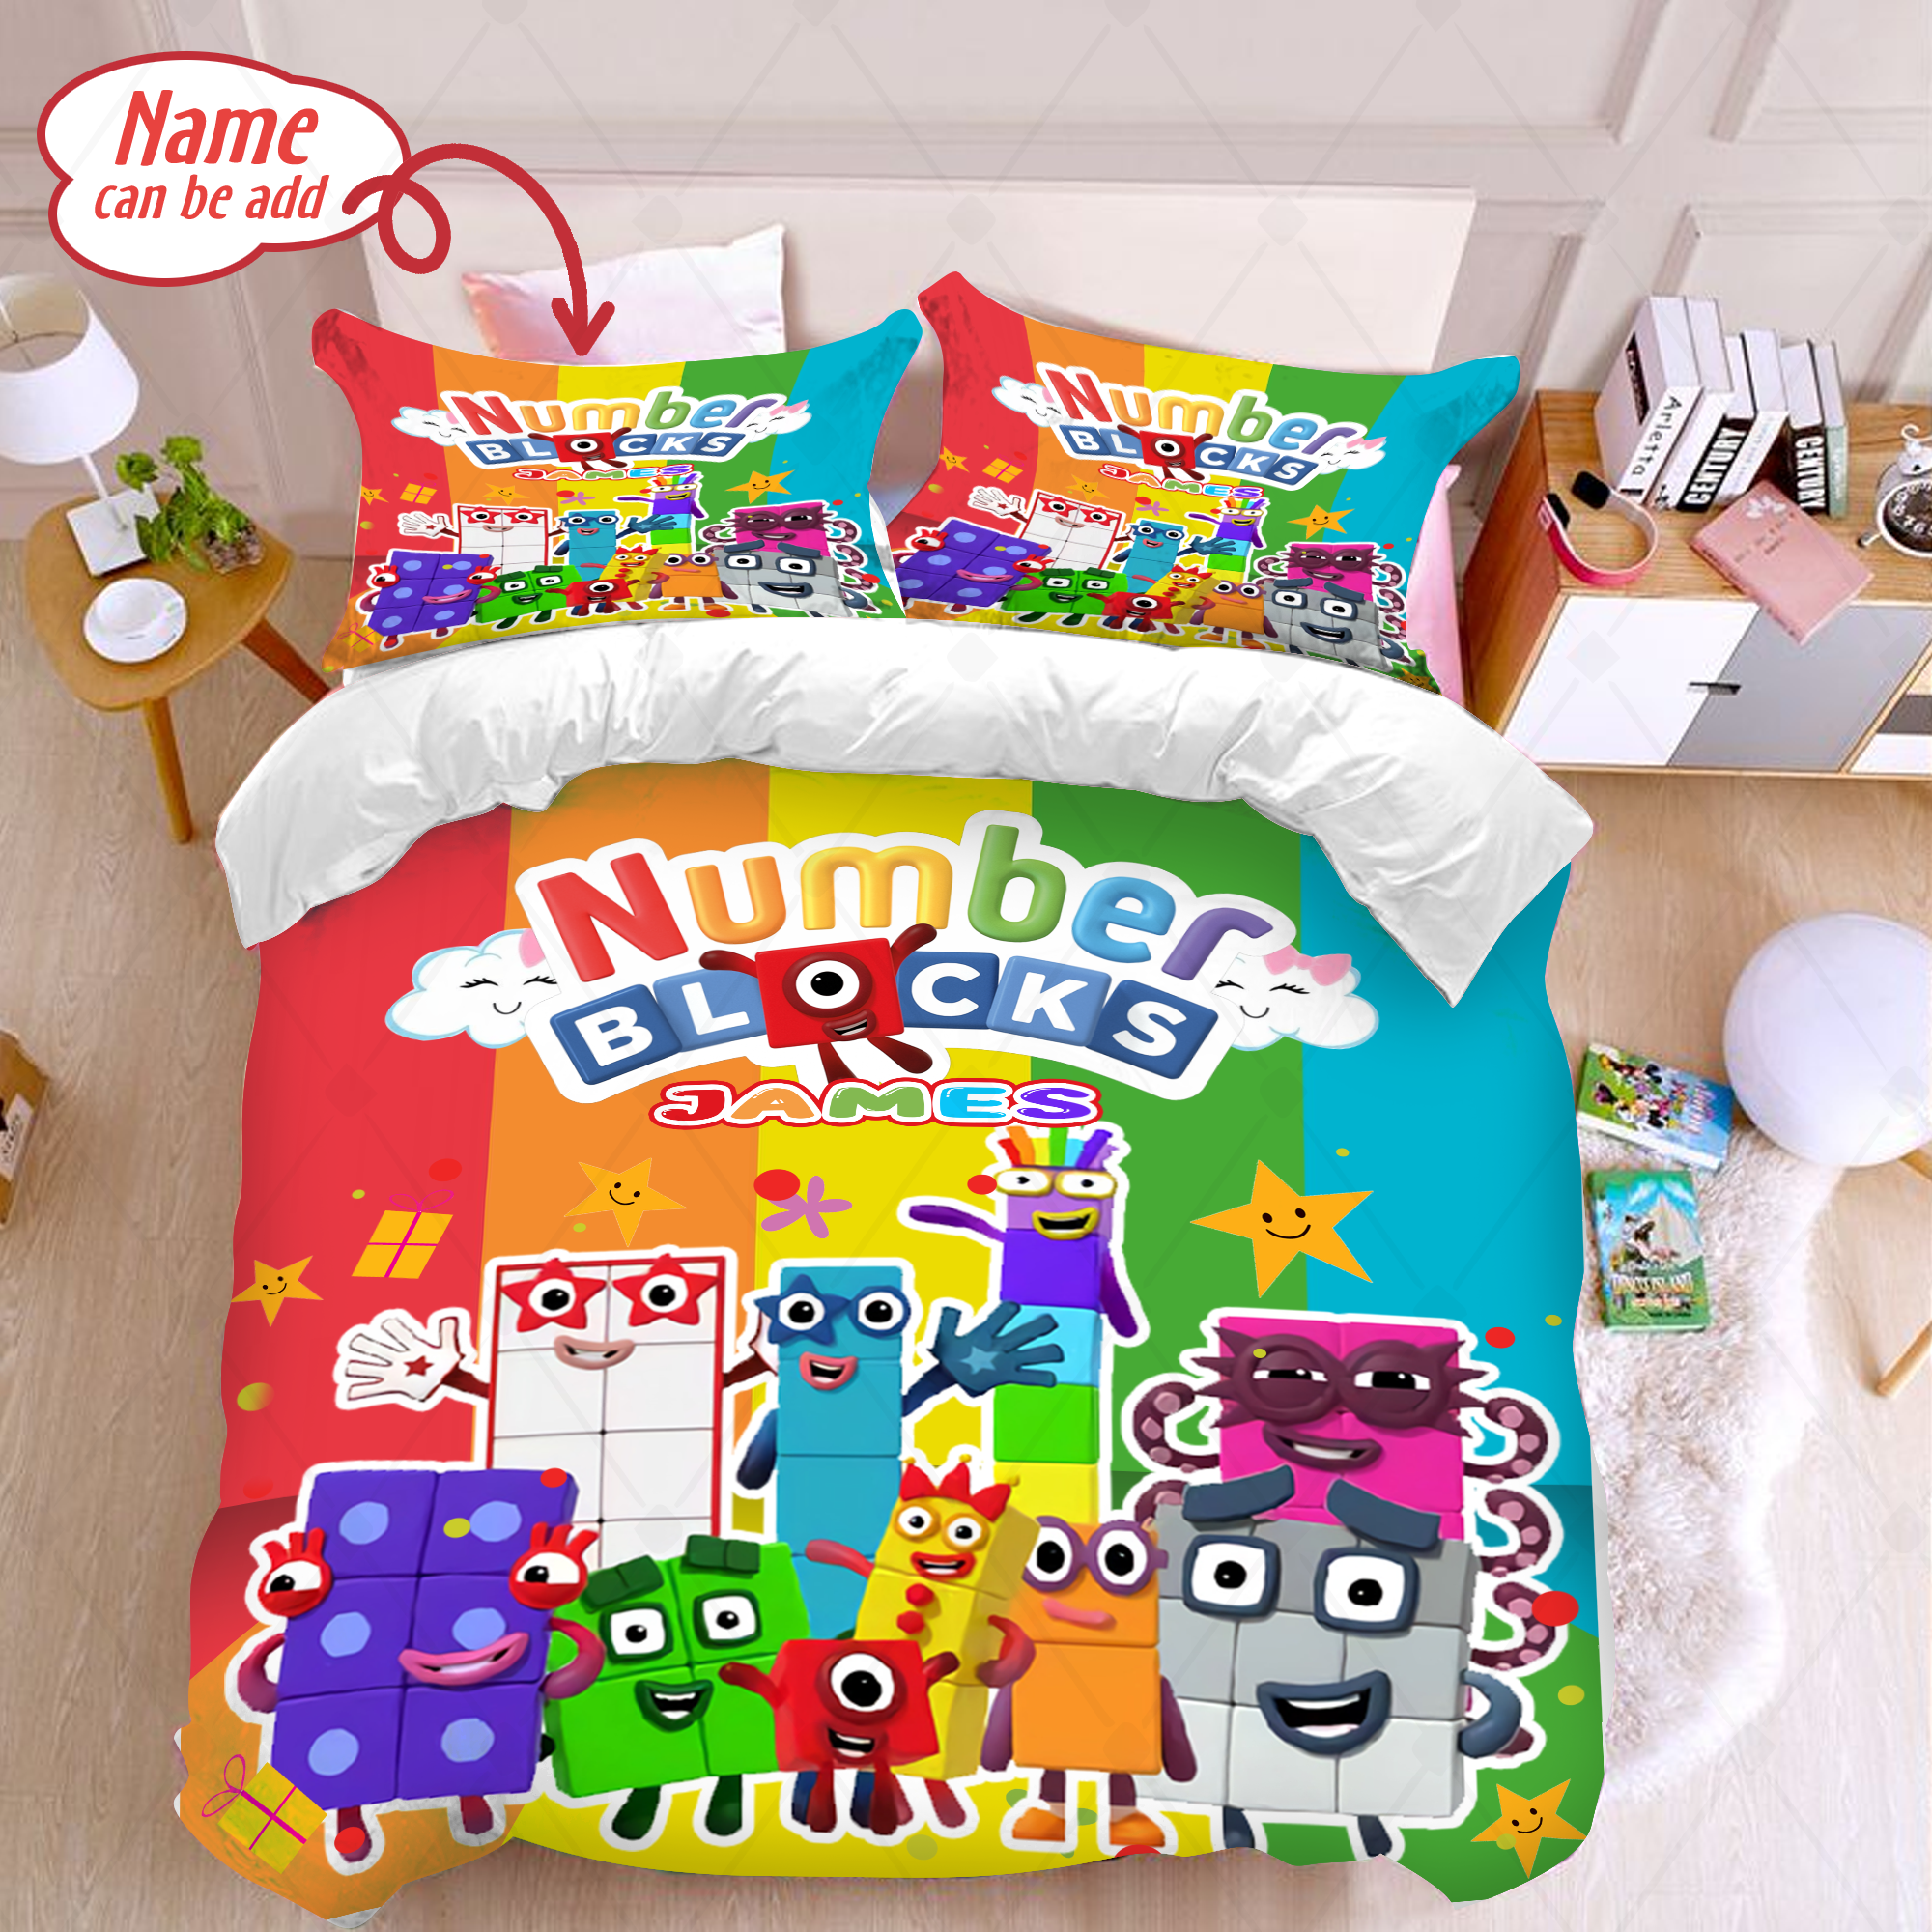 Personalized Numberblocks Duvet Cover And Pillowcase Numberblocks Bedding Set Numberblocks Birthday Party Kids Bedding Set